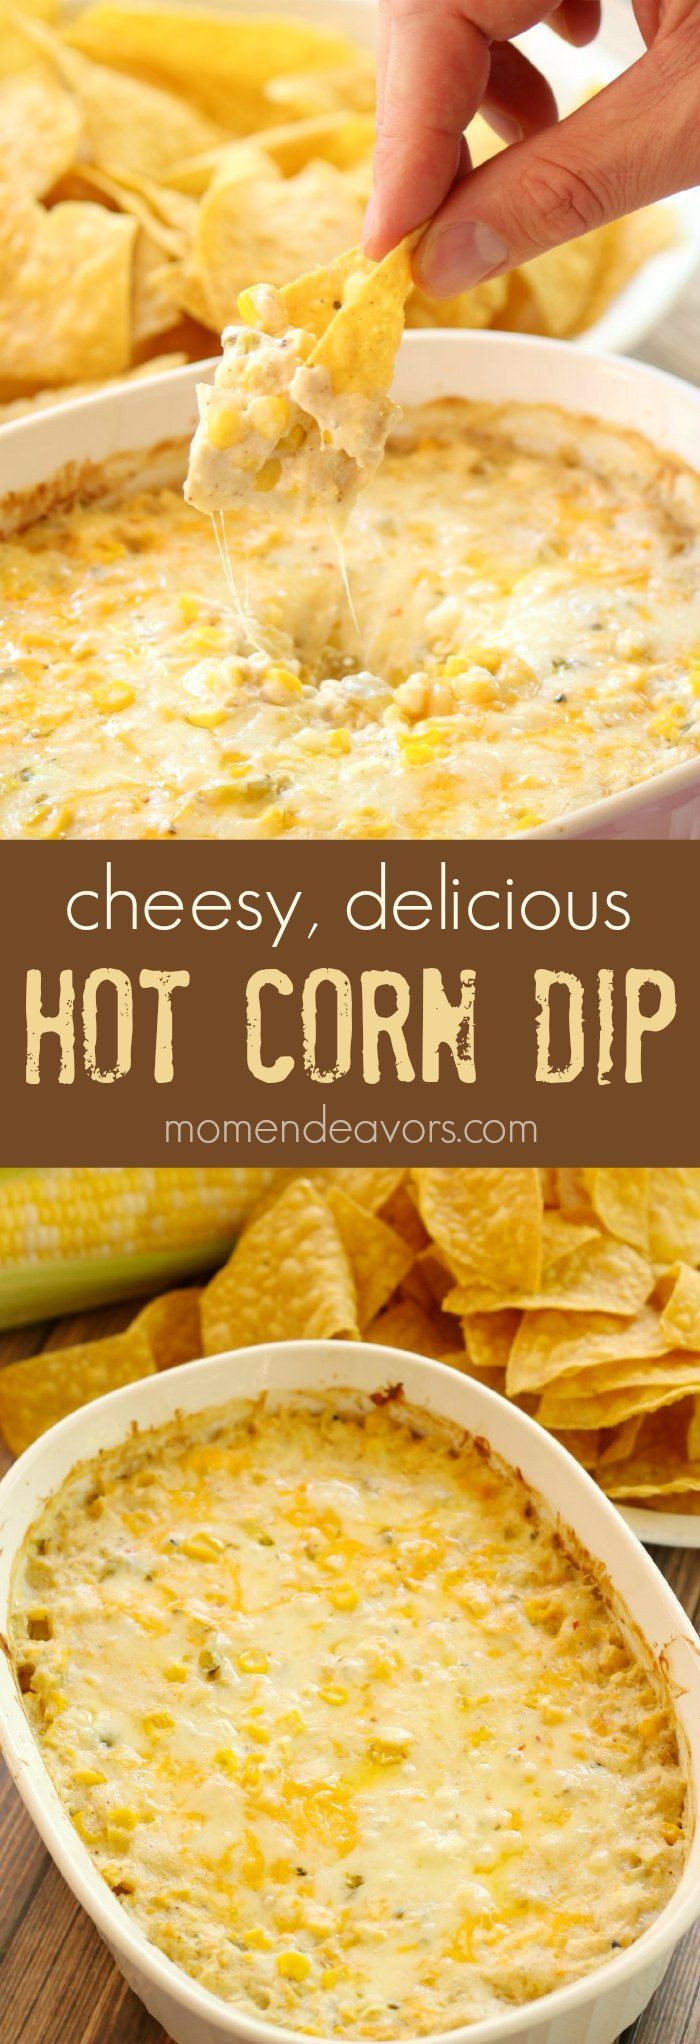 Thanksgiving Dips For Appetizers
 17 Best images about Easy Appetizers on Pinterest